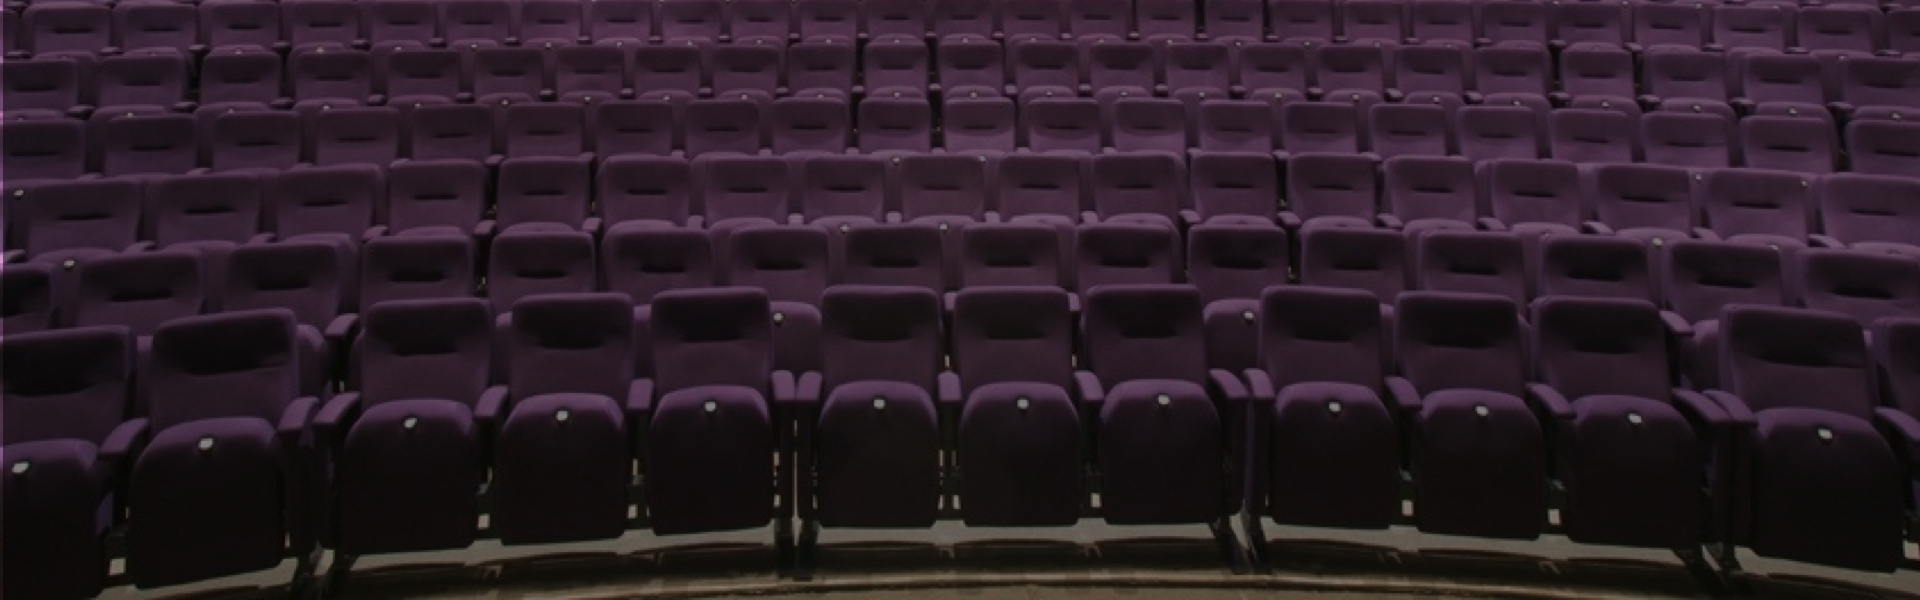 A dimly-lit section of purple cinema-style chairs